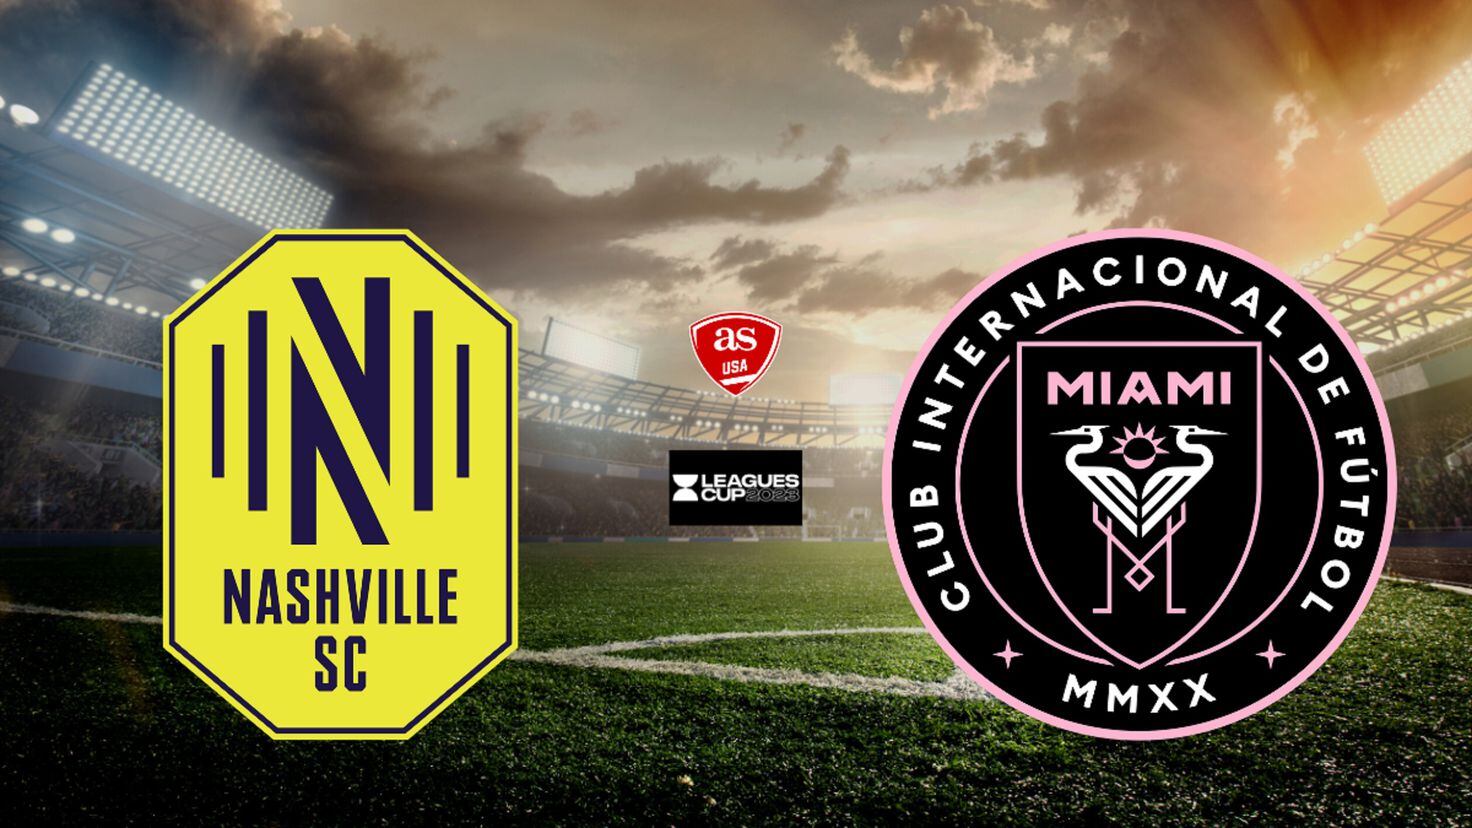 Nashville Soccer Club to Travel to Inter Miami CF in the Round of